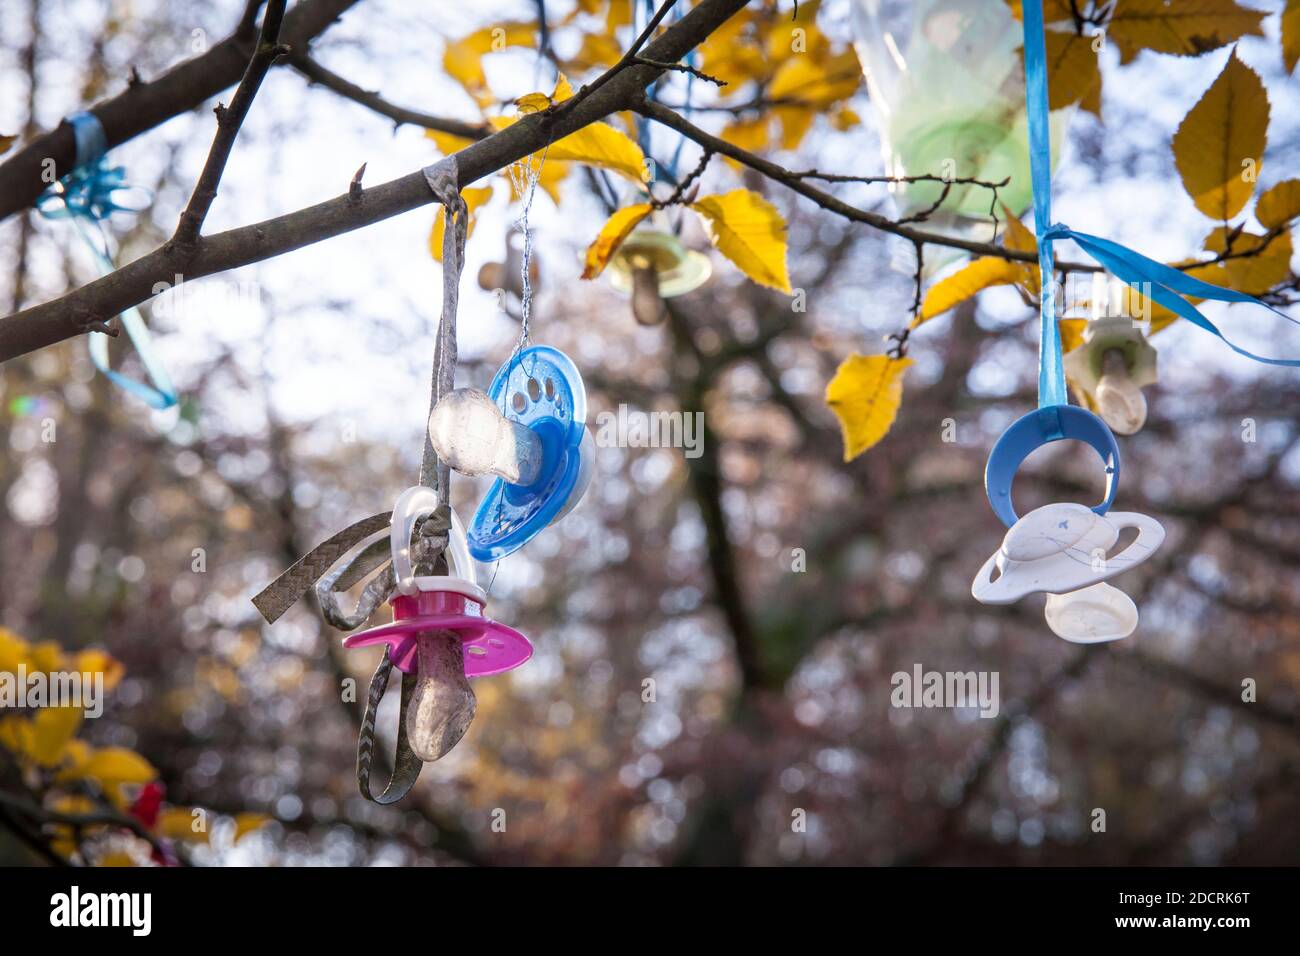 pacifier tree, for the early pacifier weaning children can hang their pacifiers in the tree and hope for a gift of the pacifier fairy, Witten, North R Stock Photo